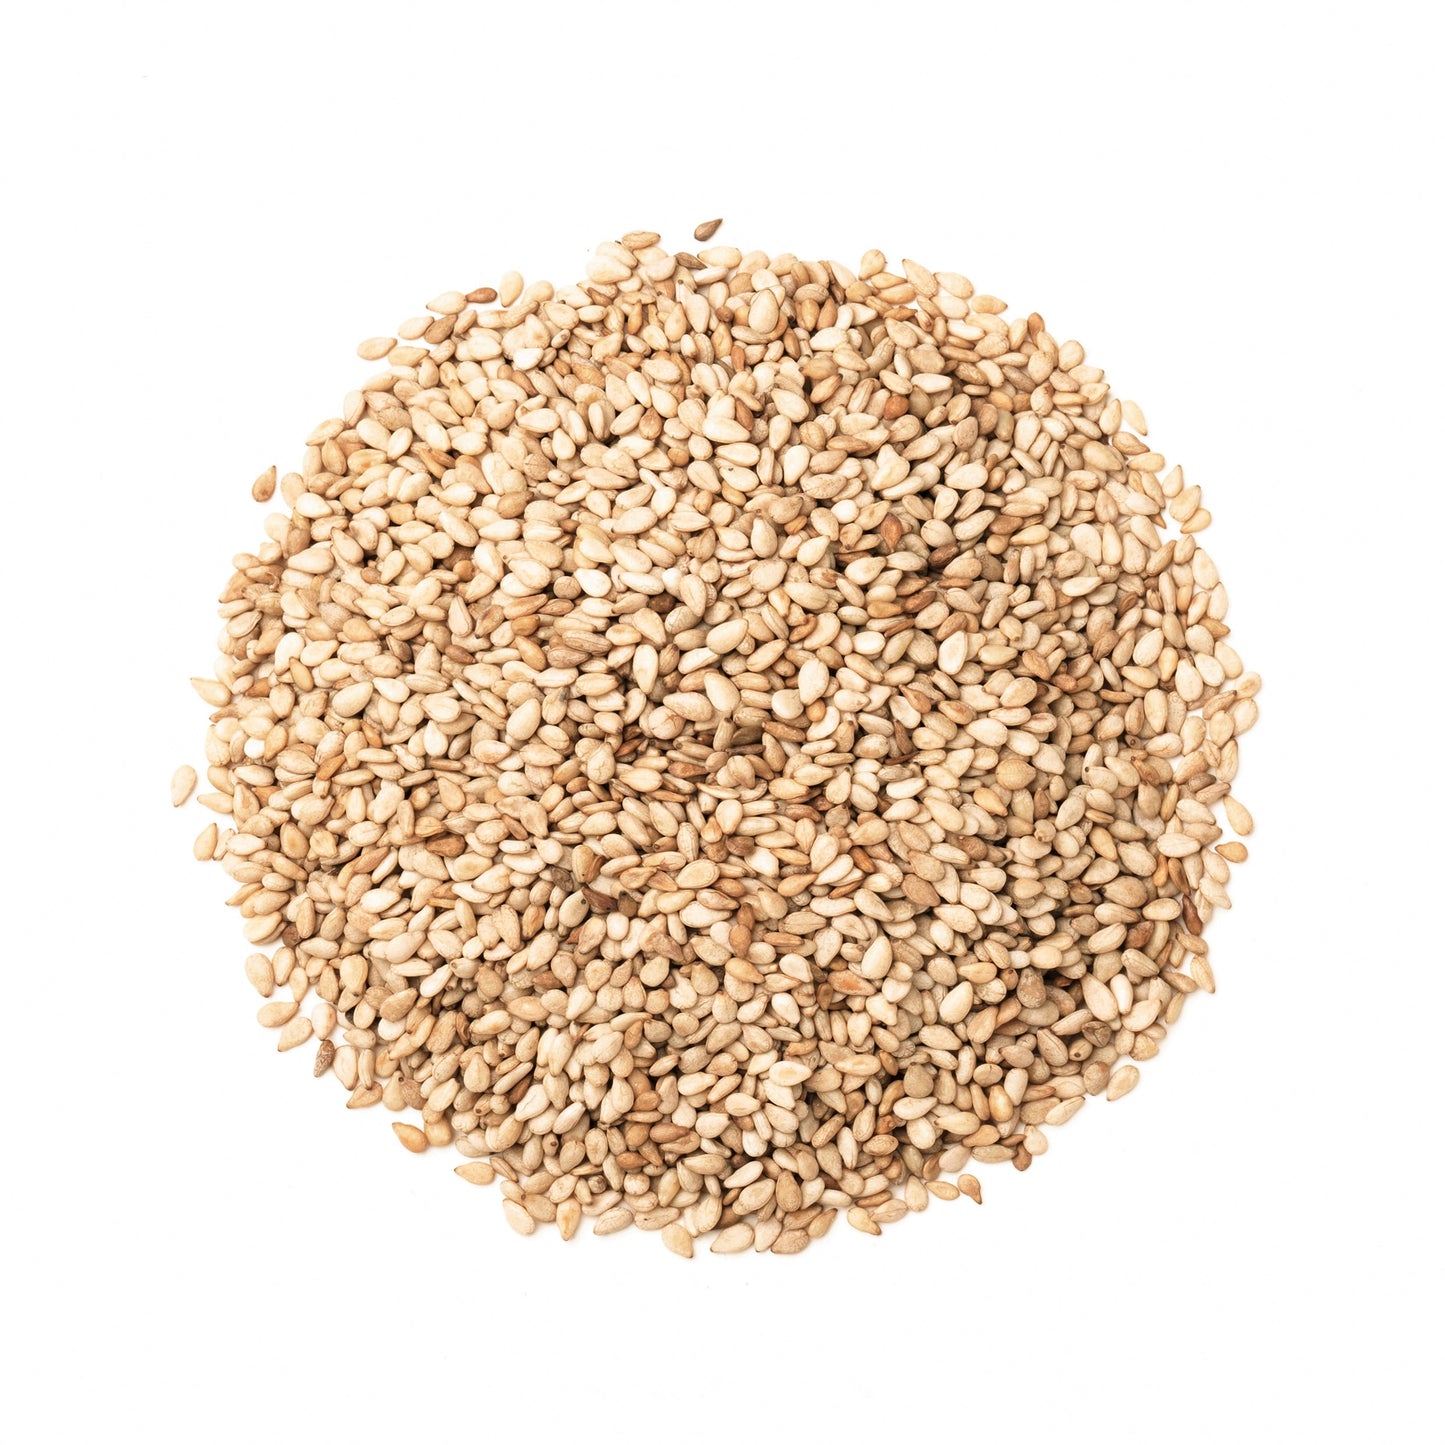 Unhulled Sesame Seeds — Non-GMO Verified, Whole Natural Raw White Sesame Seeds, Kosher, Vegan, and Keto, Bulk Sesame. High in Calcium, Iron, and Fiber. Perfect for Stir-fries, Noodles, and Baking